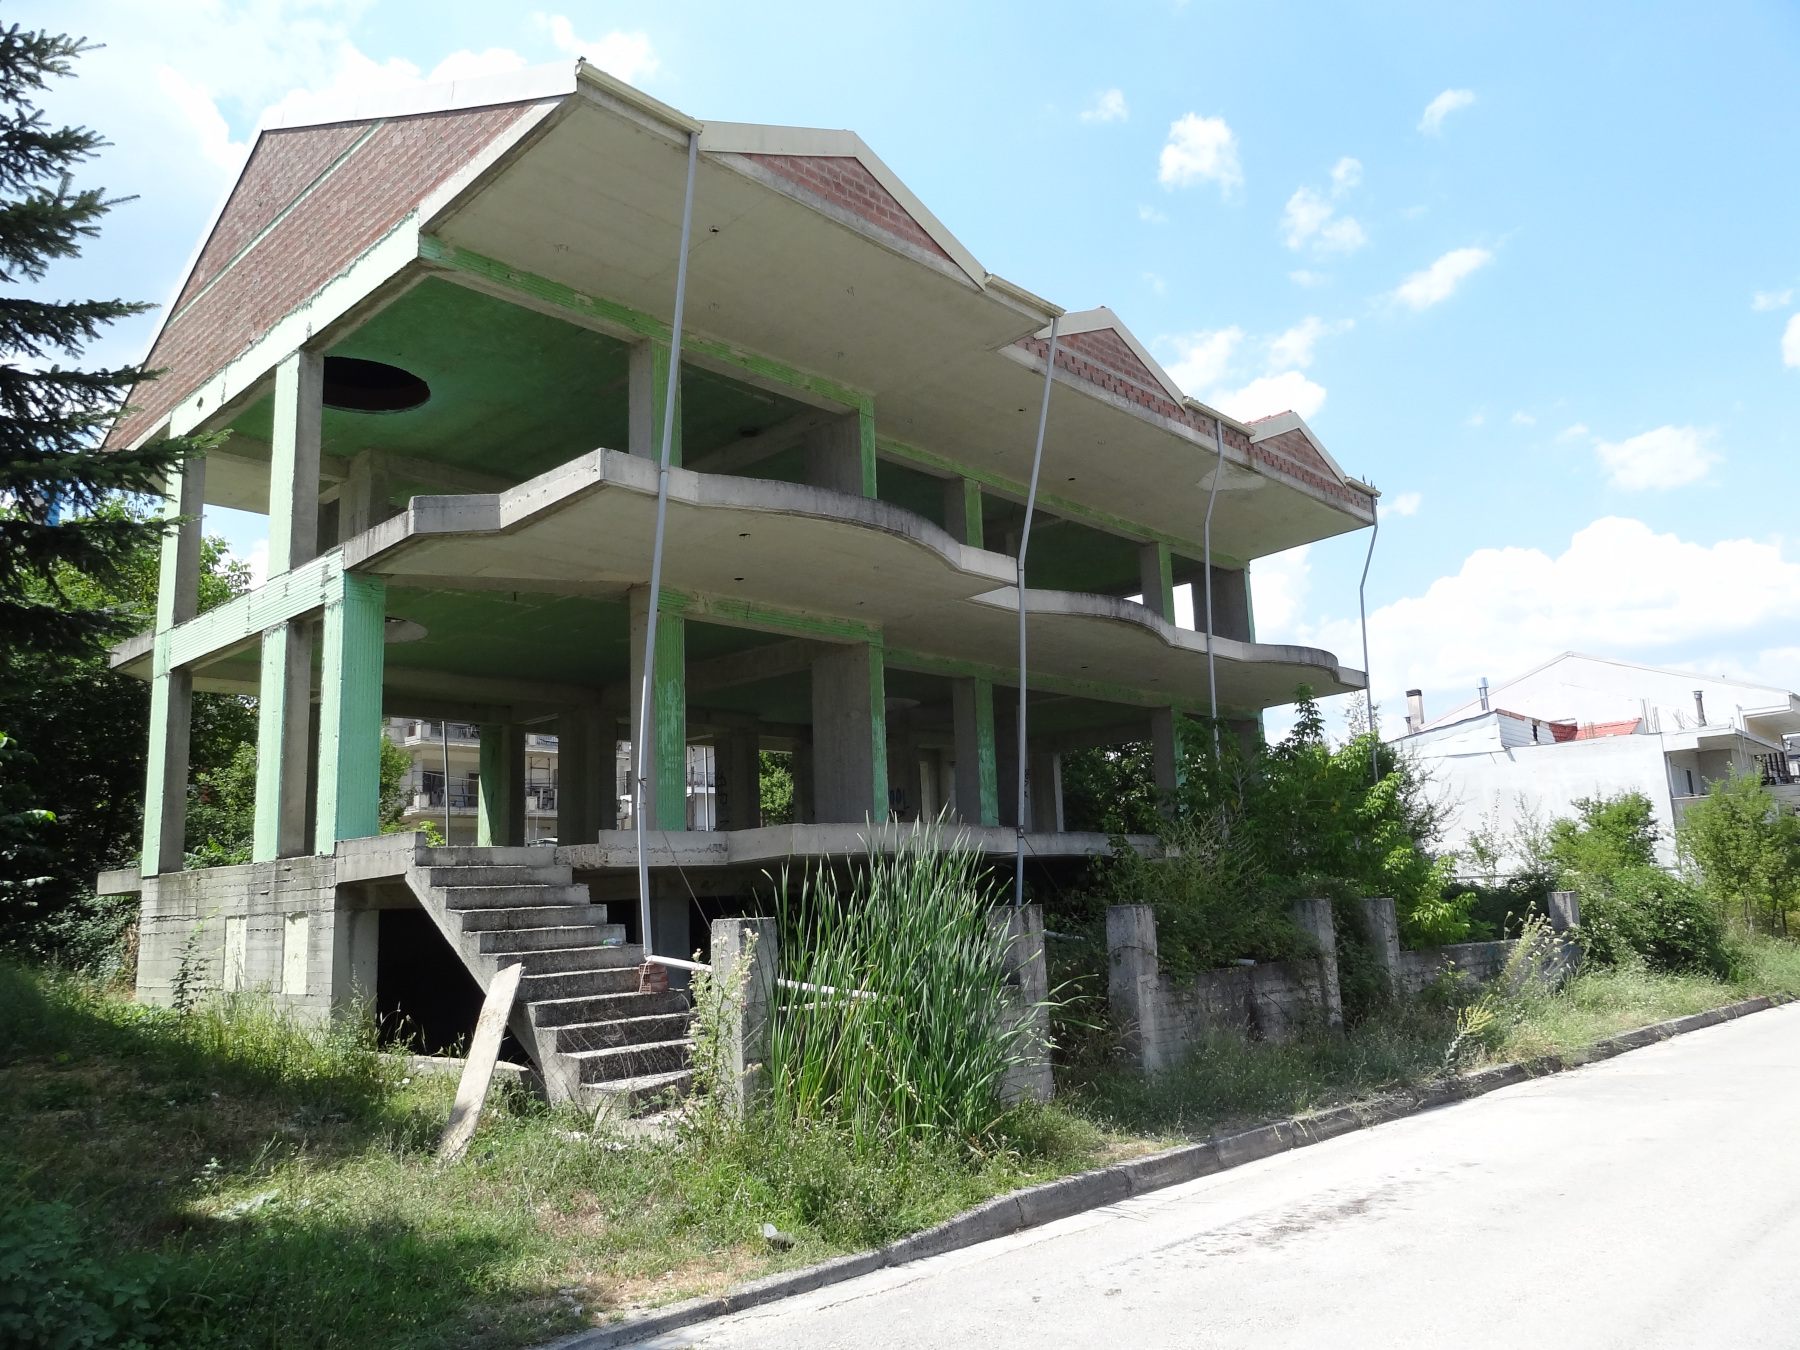 Unfinished residential complex for sale consisting of 3 maisonettes with a total area of 300 sq.m. in the Nea Zoi area of Ioannina on Achilleos Street